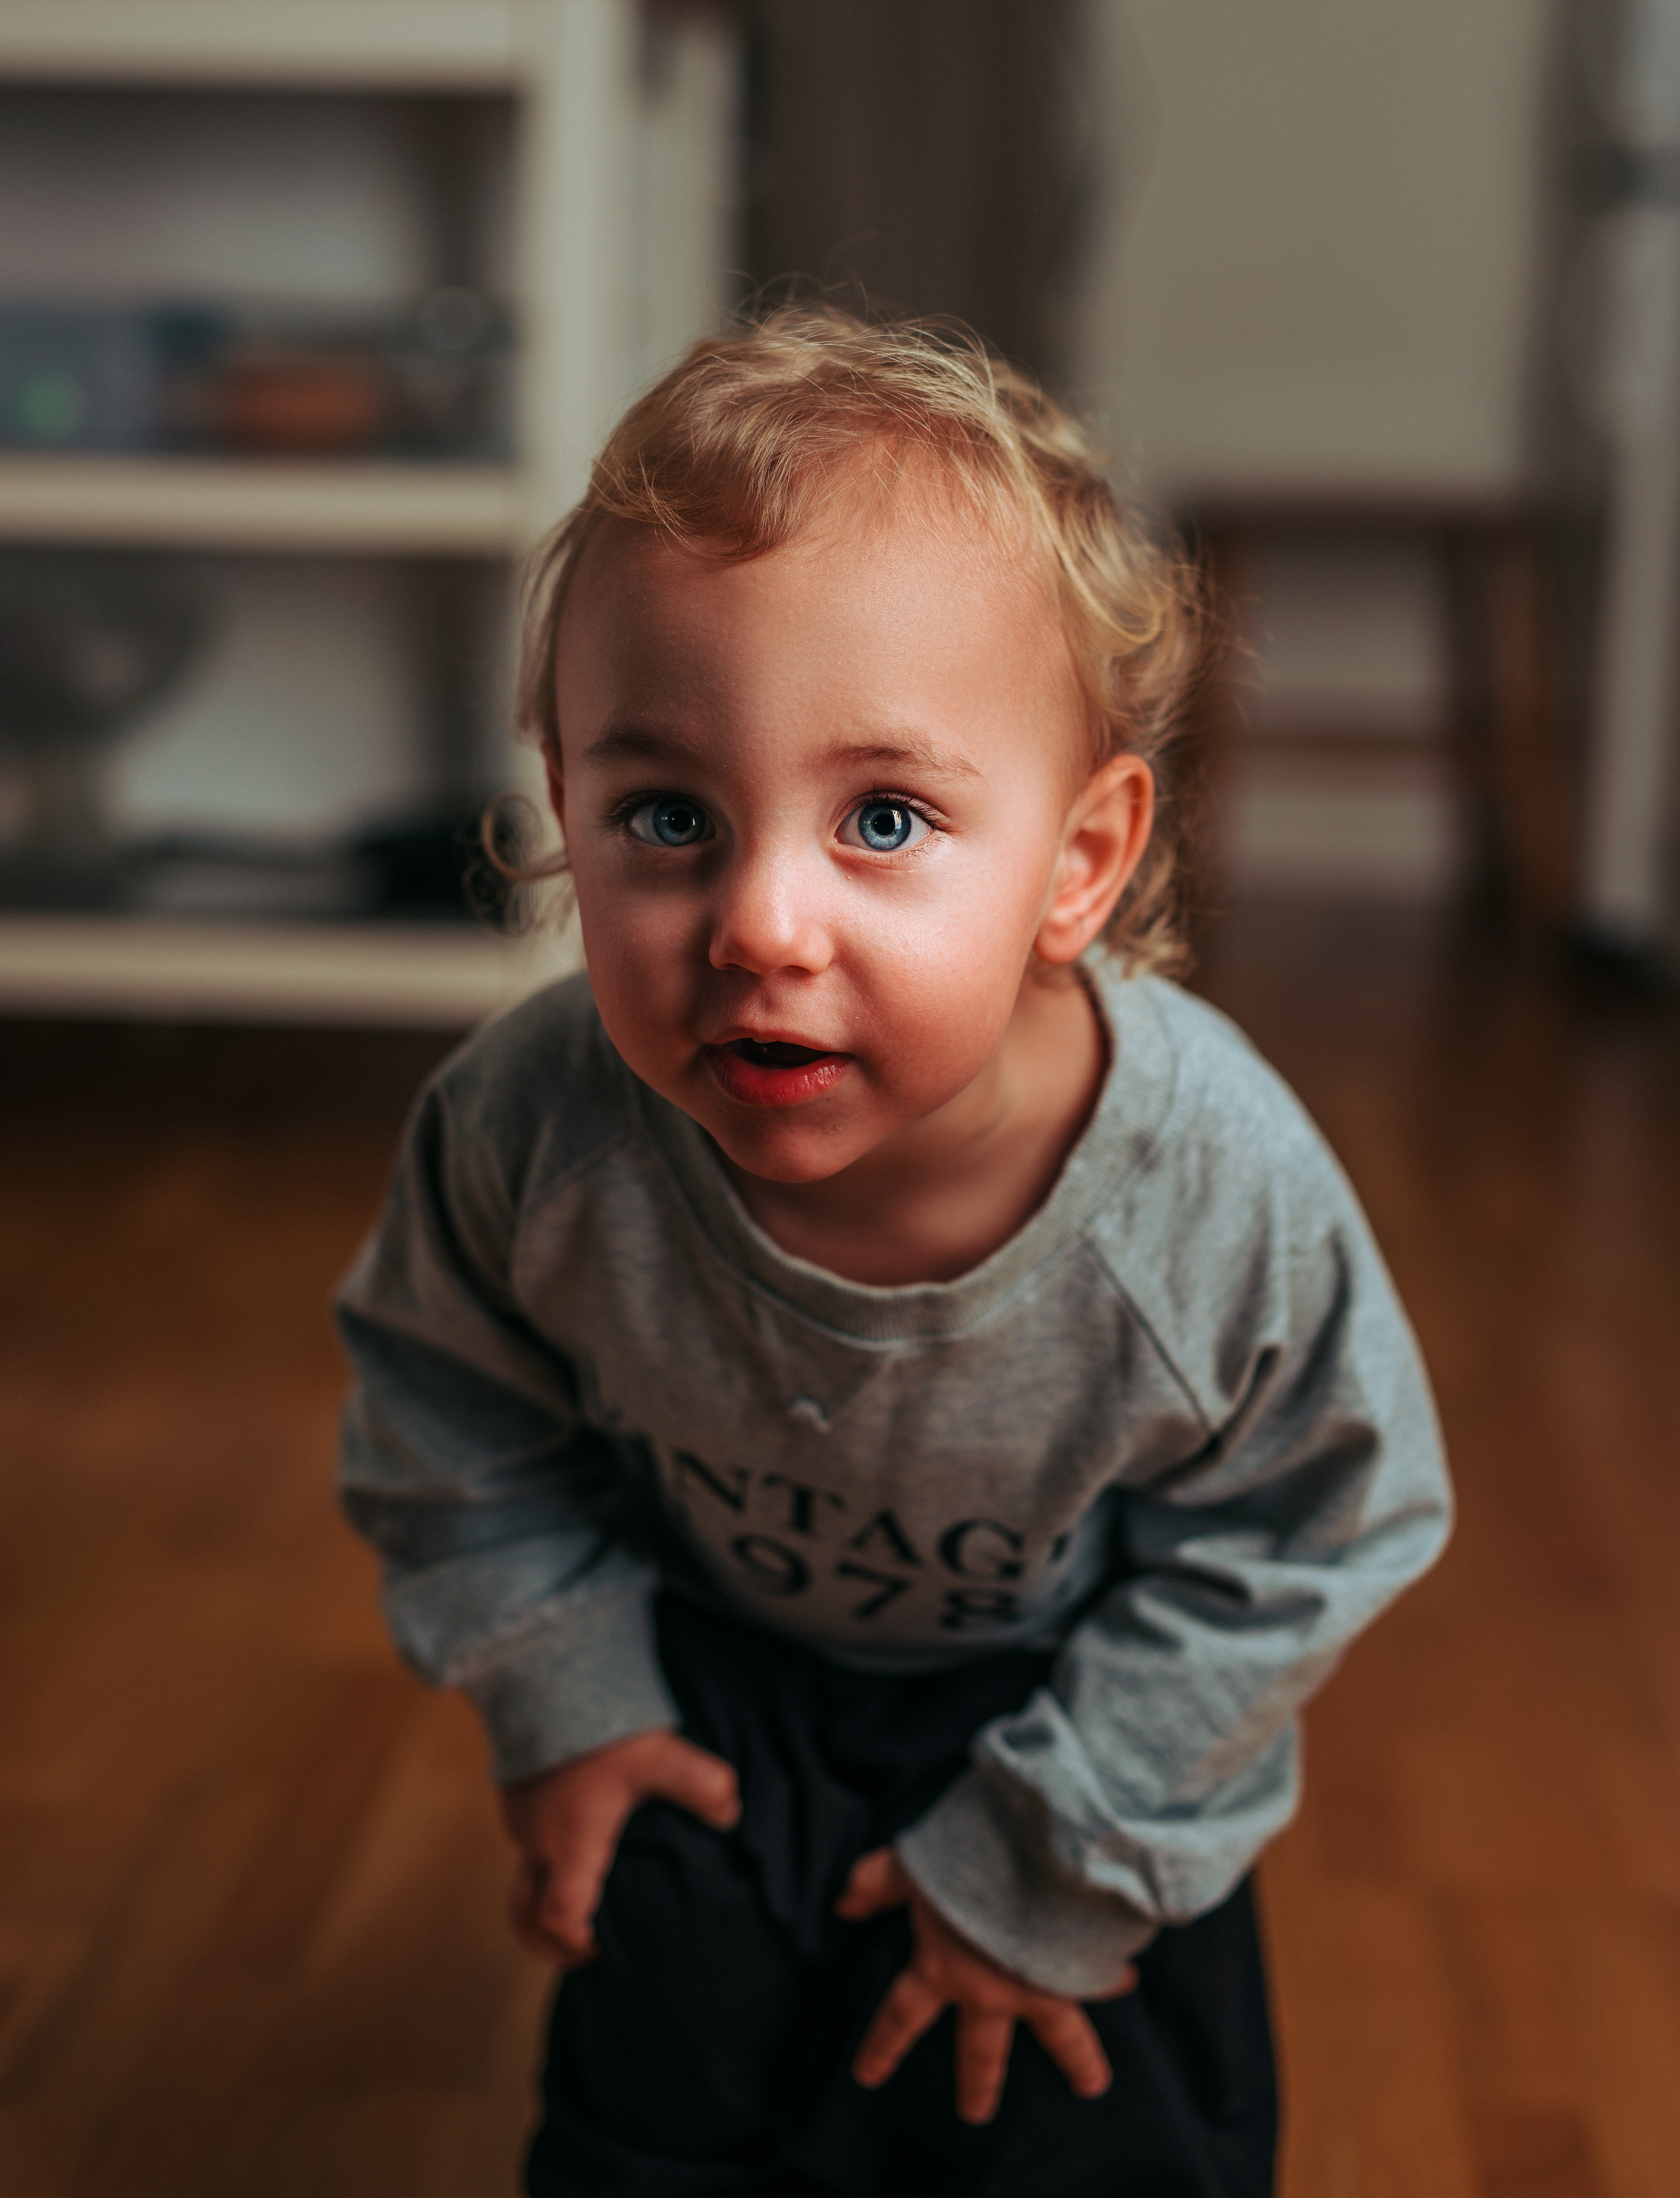 Dexter changed the toddler's clothes and fed him. | Source: Unsplash